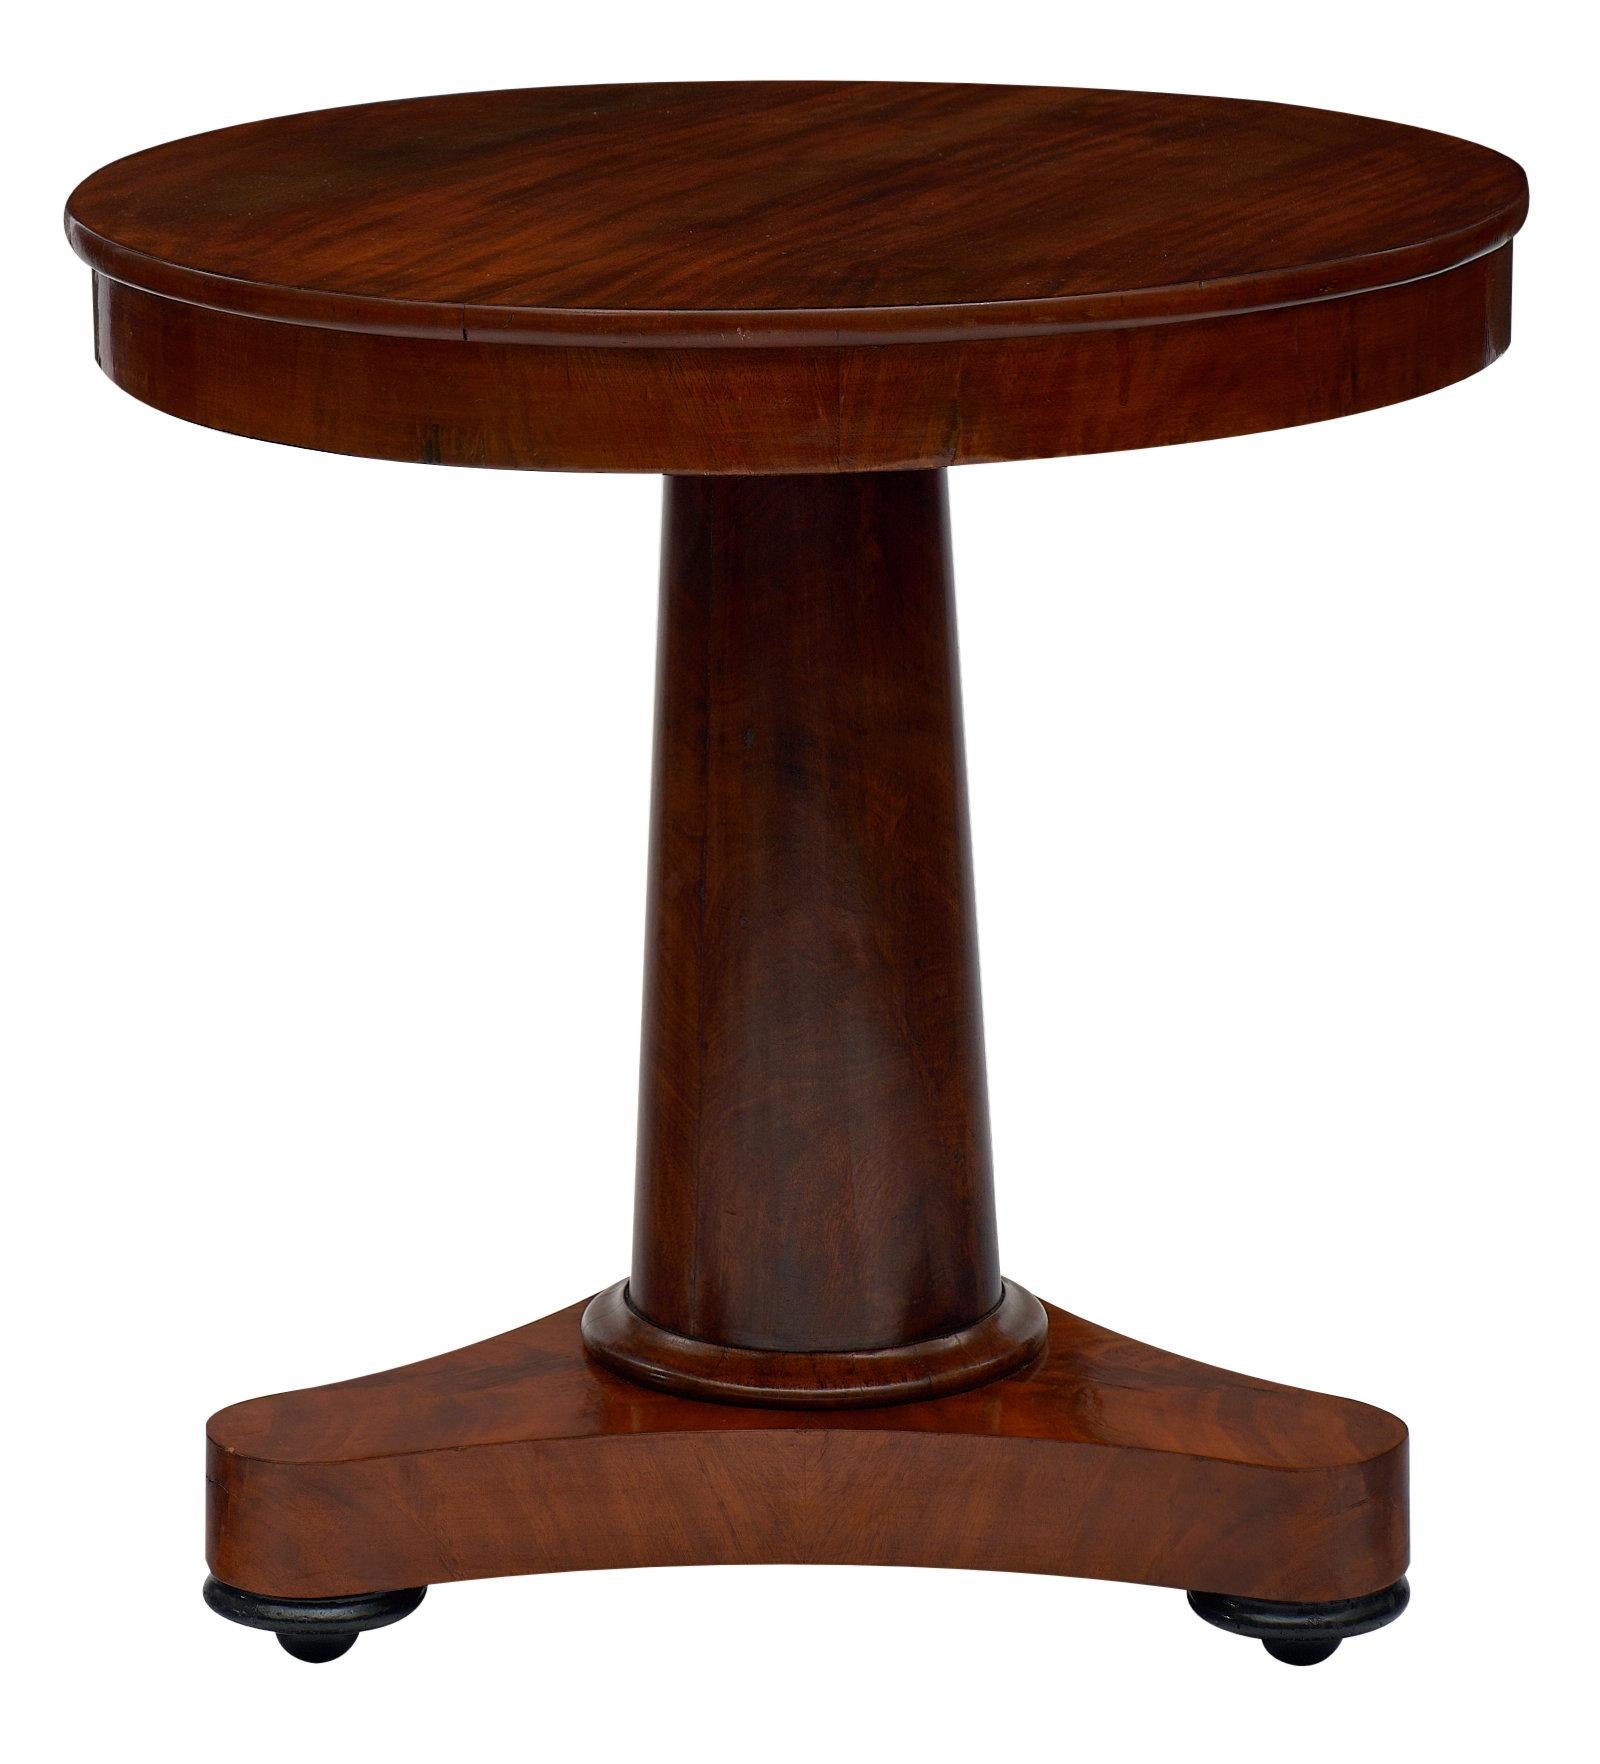 French Empire guéridon made of Cuban flamed mahogany and featuring a central tripod foot. We loved the bold lines and neoclassical proportions. There is a versatile feel of the piece with beautiful warmth to the wood.